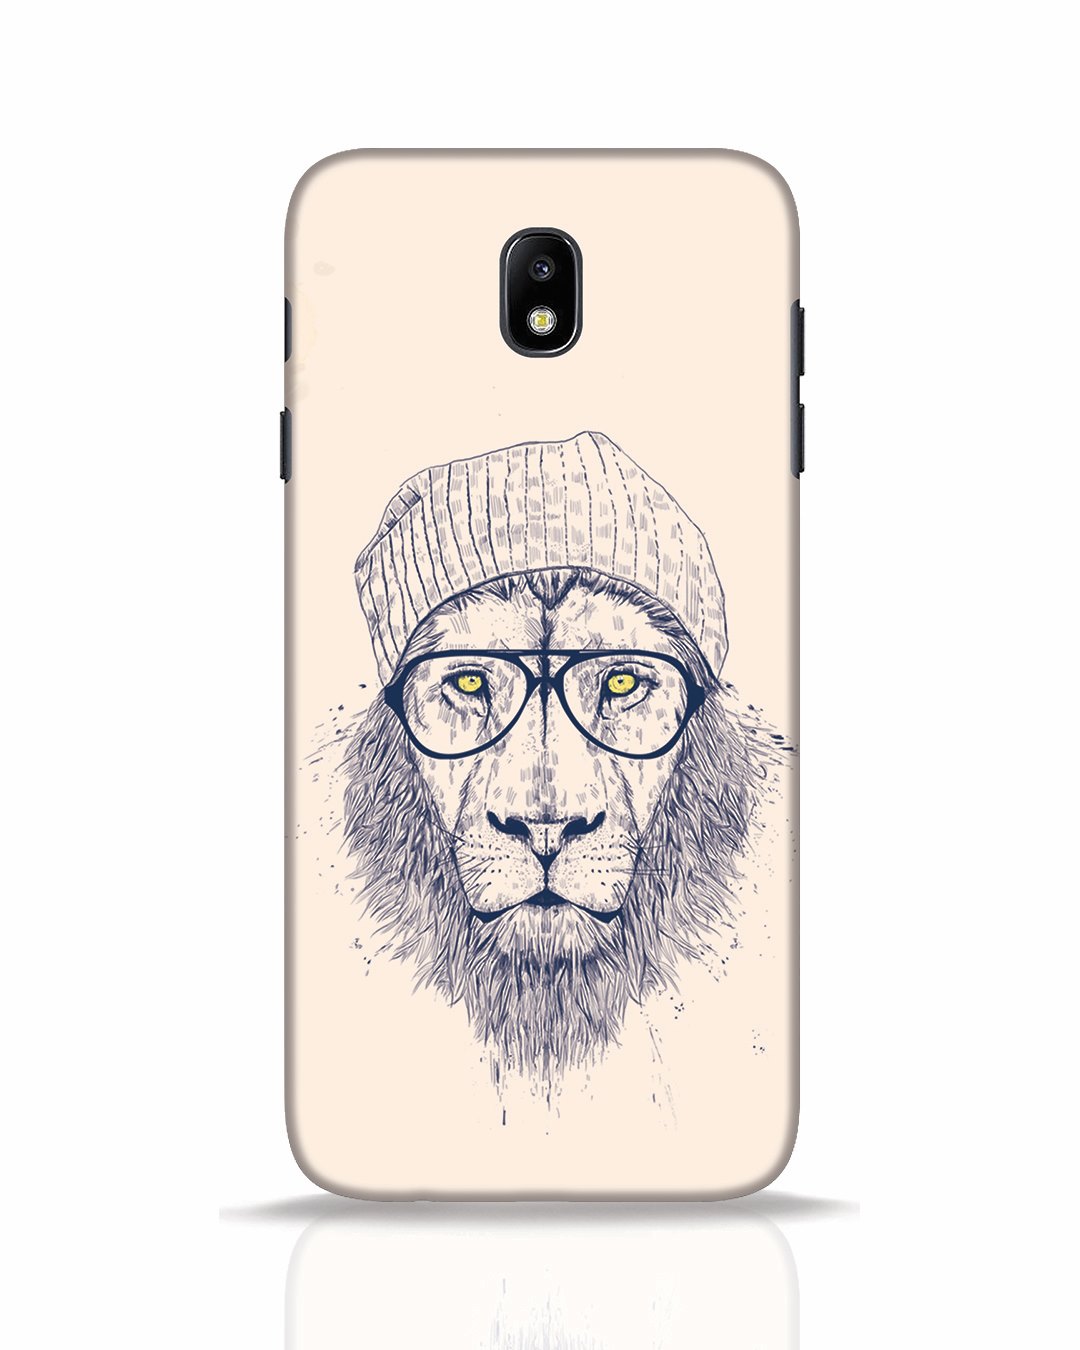 Cool Lion Samsung Galaxy J7 Pro Mobile Cover Samsung Galaxy J7 Pro Mobile Covers Bewakoof.com